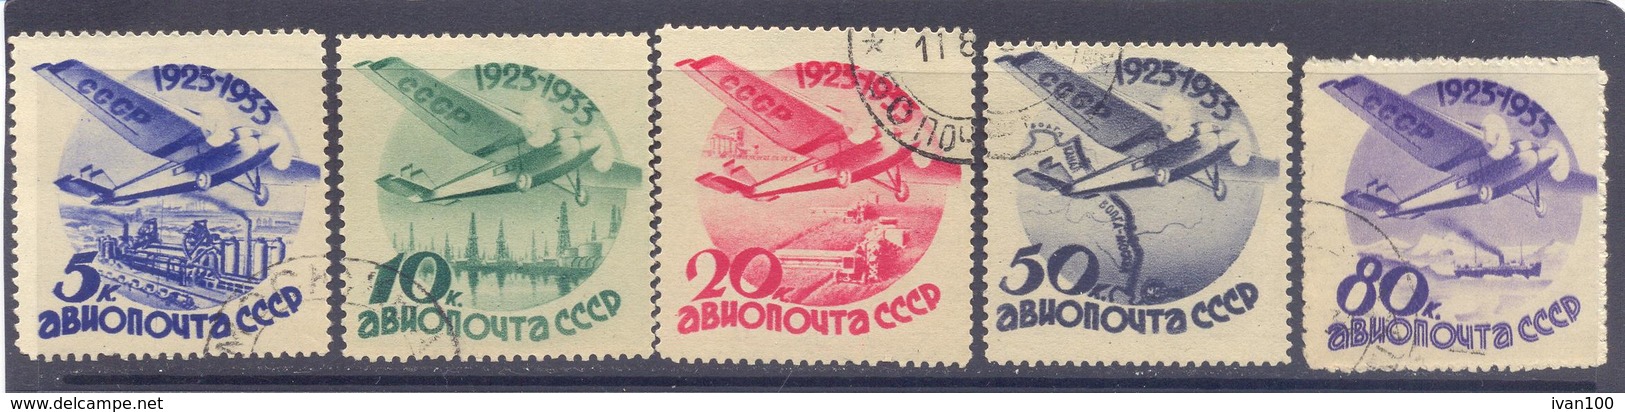 1934. USSR/Russia, 10th Anniv. Of Soviet Civil Aviation And USSR Air-mail Service, Mich.462/66v, Used - Oblitérés